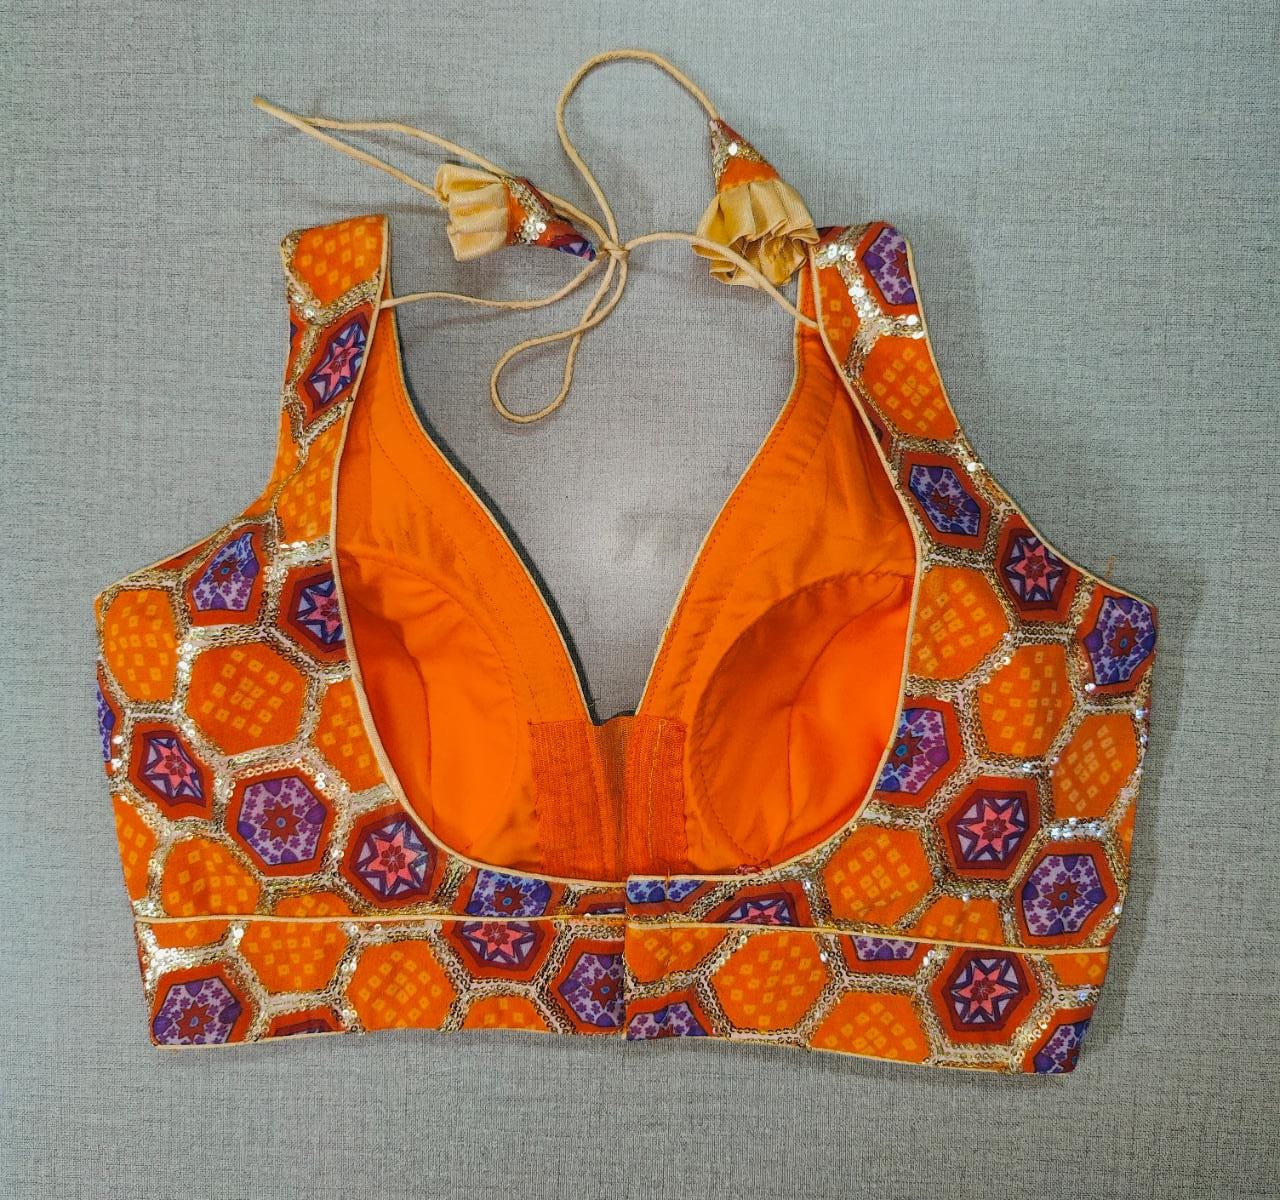 Beautifully designed orange and blue bhandej printed saree blouse. Pair it with a bandhani saree and bhandej sarees to create a beautiful Indian festival look. Buy Indian saree blouses, readymade saree blouses, and designer blouses for sarees from Pure Elegance Indian fashion store in USA.-Back View